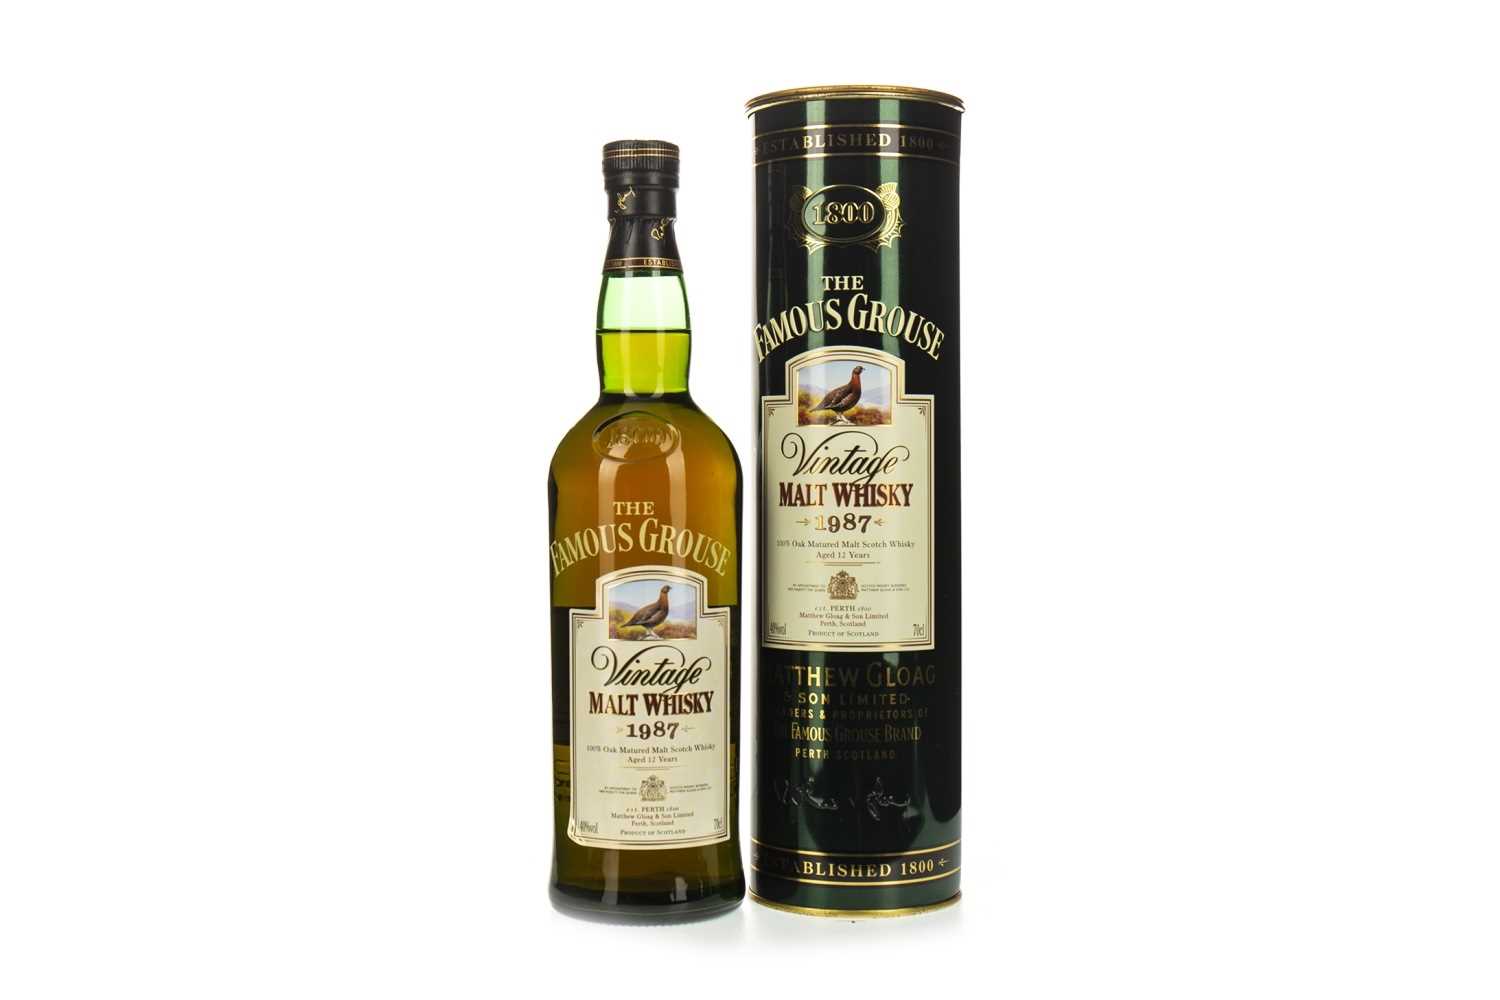 Lot 1322 - FAMOUS GROUSE 1987 MALT AGED 12 YEARS